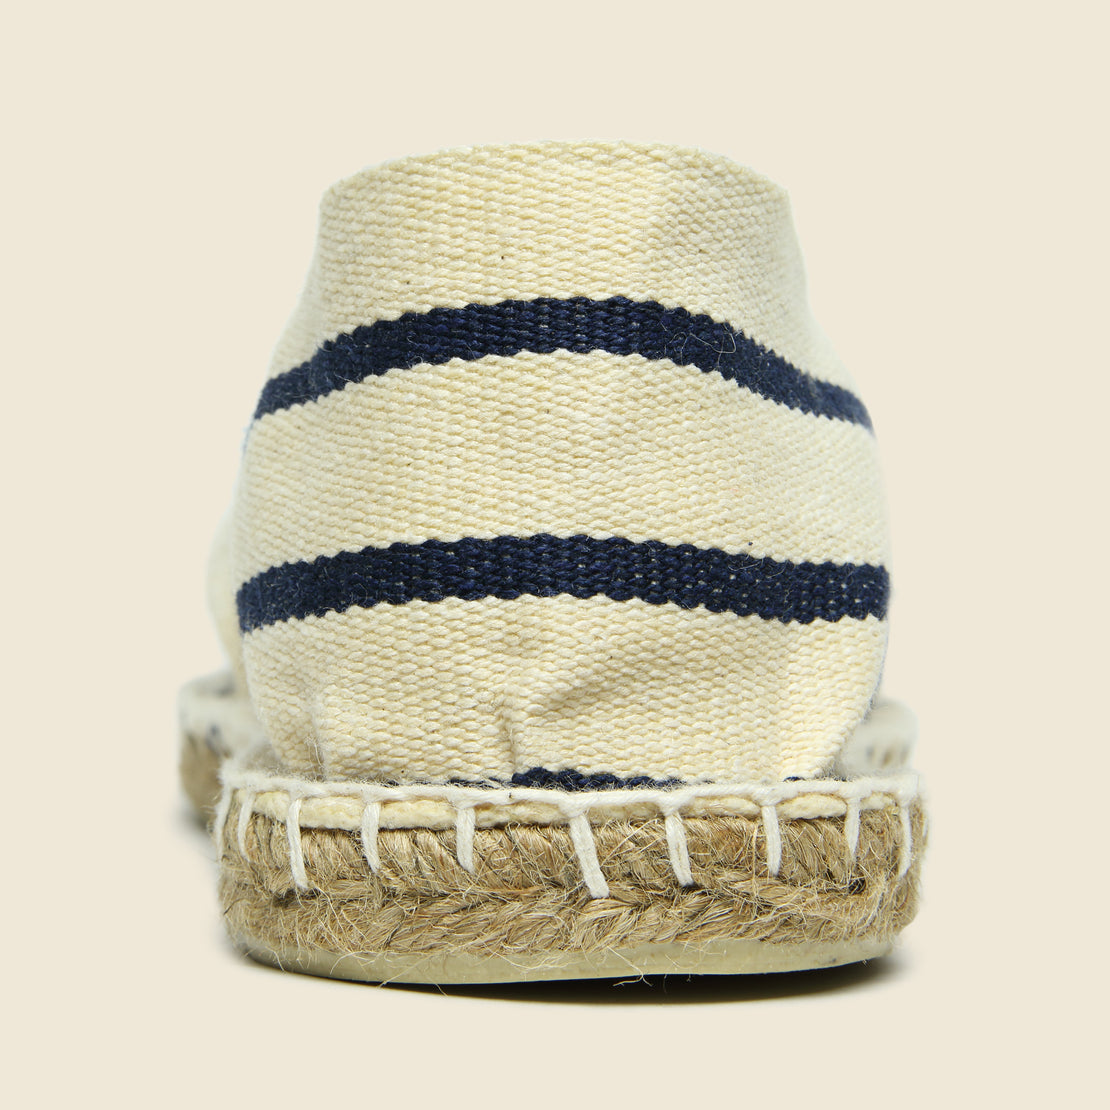 Stripe Espadrilles - Navy/Natural - Armor Lux - STAG Provisions - W - Shoes - Sandals